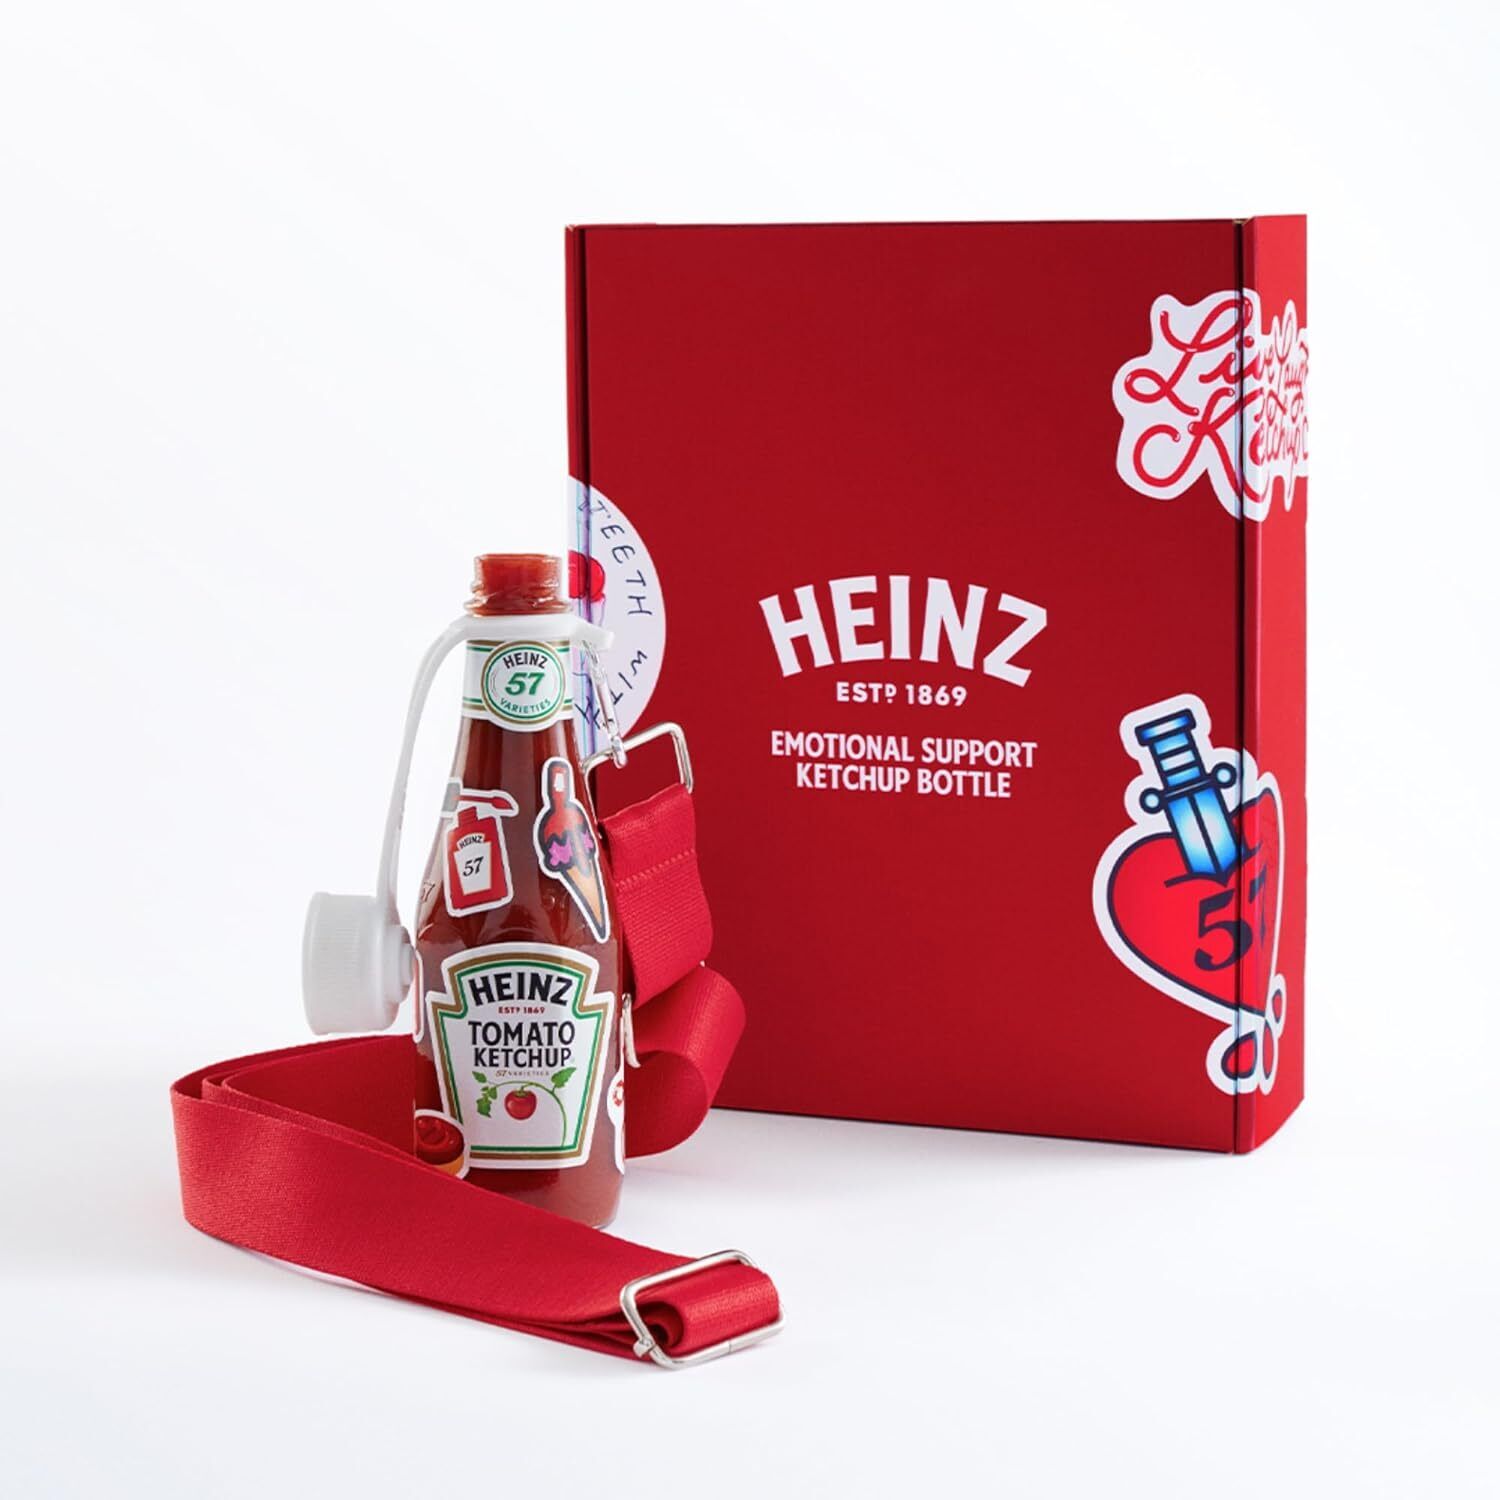 ❤️Brand New/Sealed - HEINZ Emotional Support Ketchup Bottle ❤️